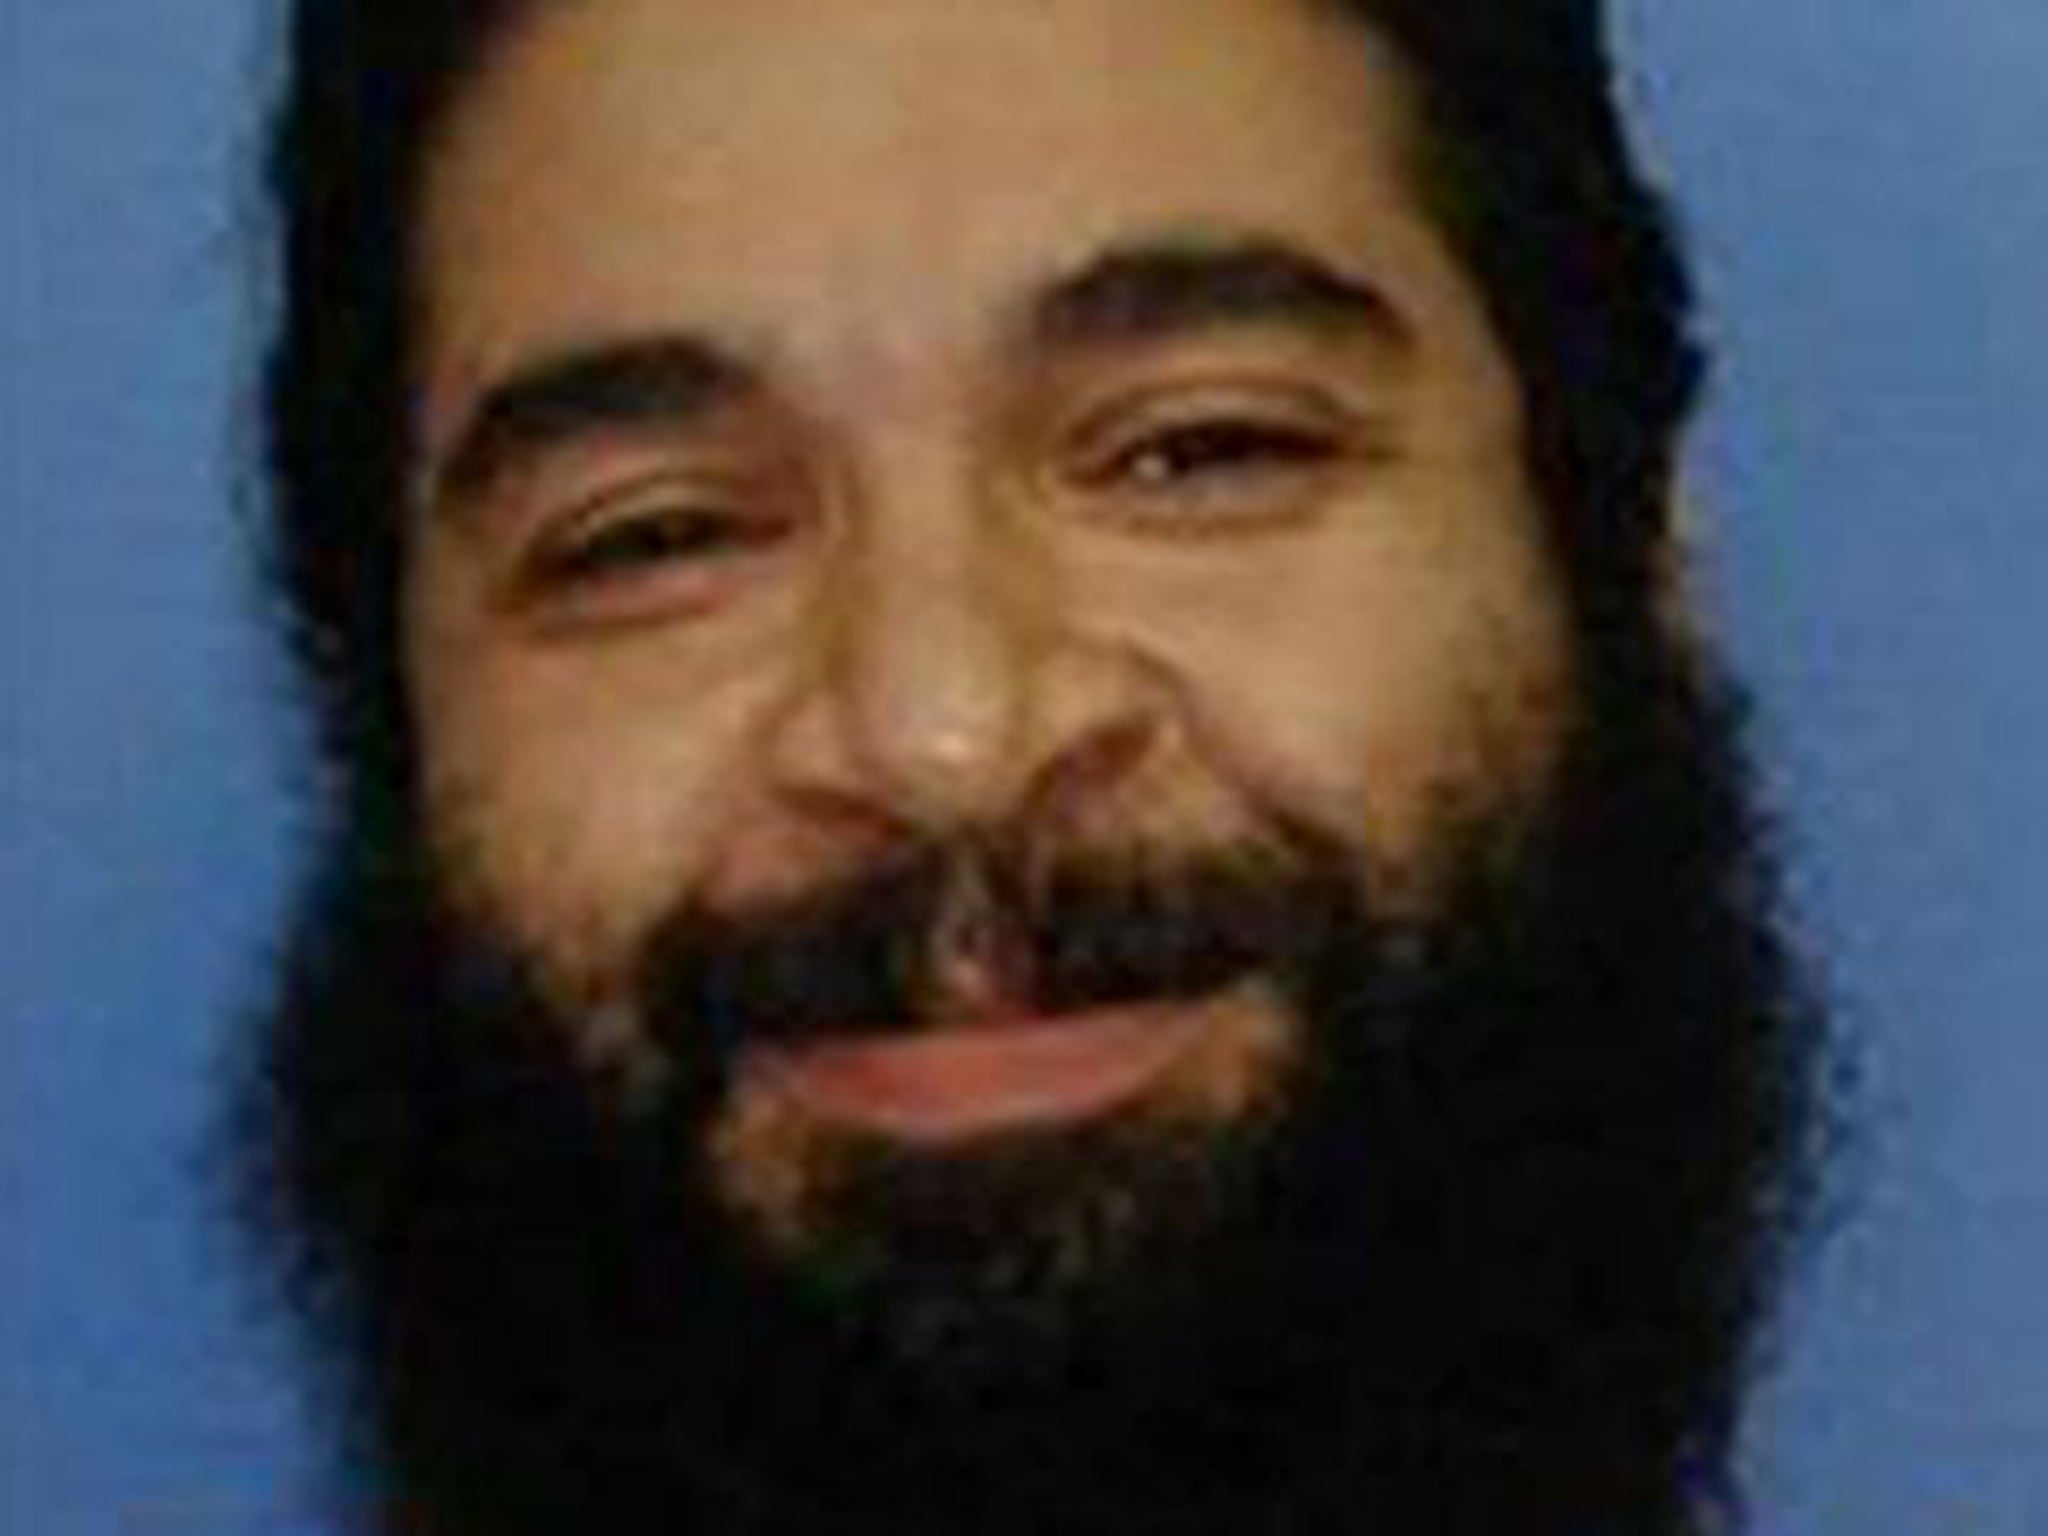 Shaker Aamer has been kept in Guantanamo Bay for 13 years but has never been charged or tried